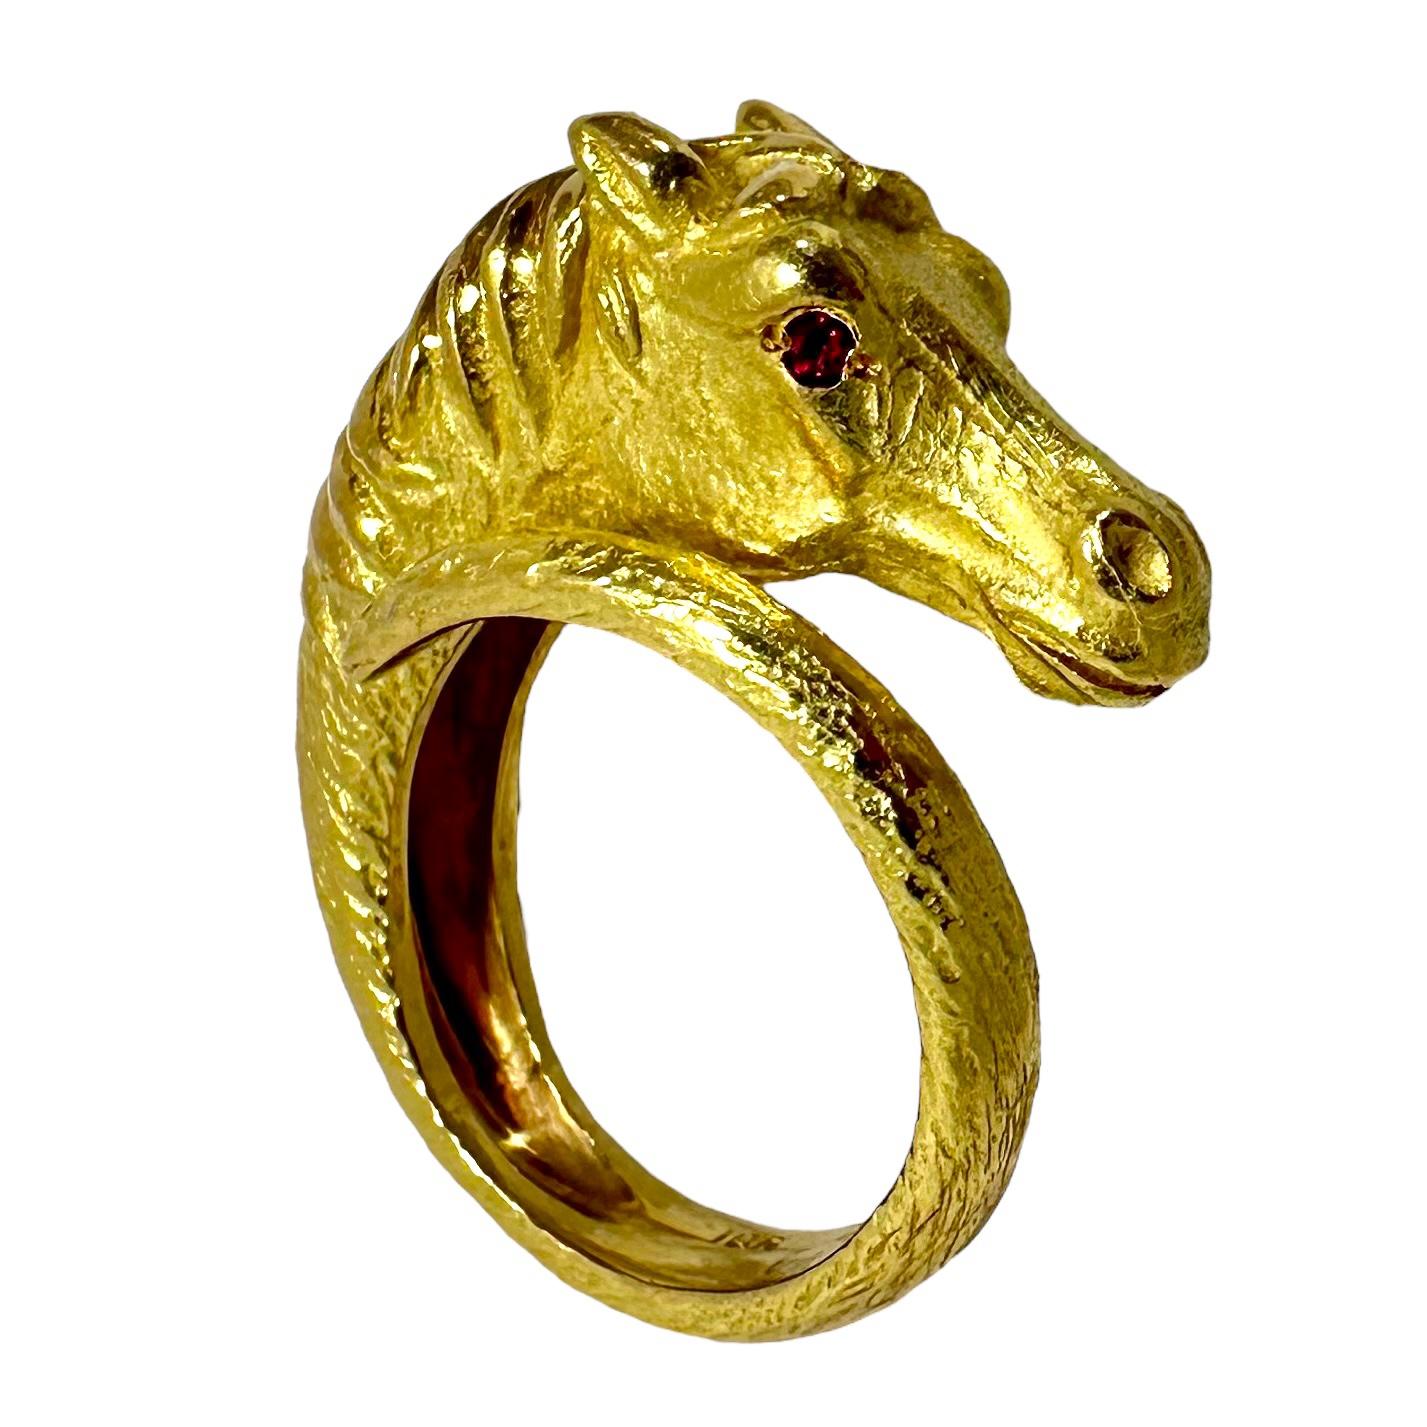 This George Lederman designer vintage horse head ring, crafted in 18k yellow gold is characteristically very well detailed. The entire surface is finished in this designers benchmark finish. The two vibrant ruby eyes complete the appearance of high